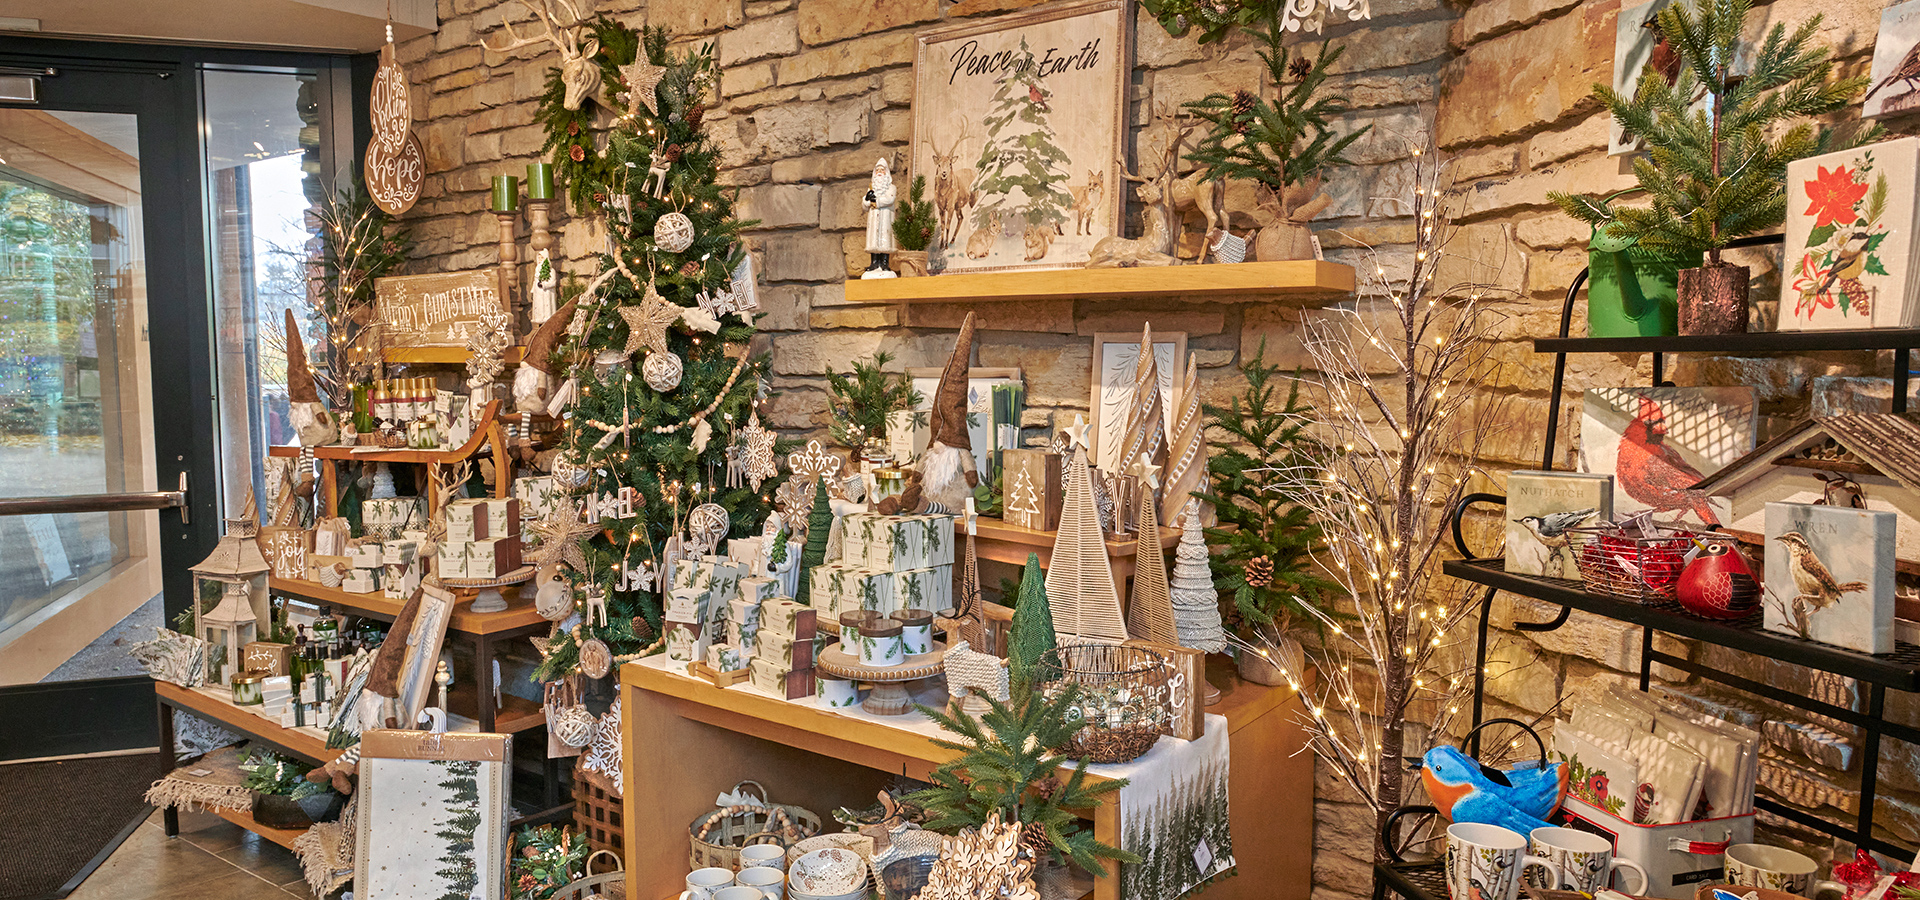 Winter product display in The Arboretum Store.